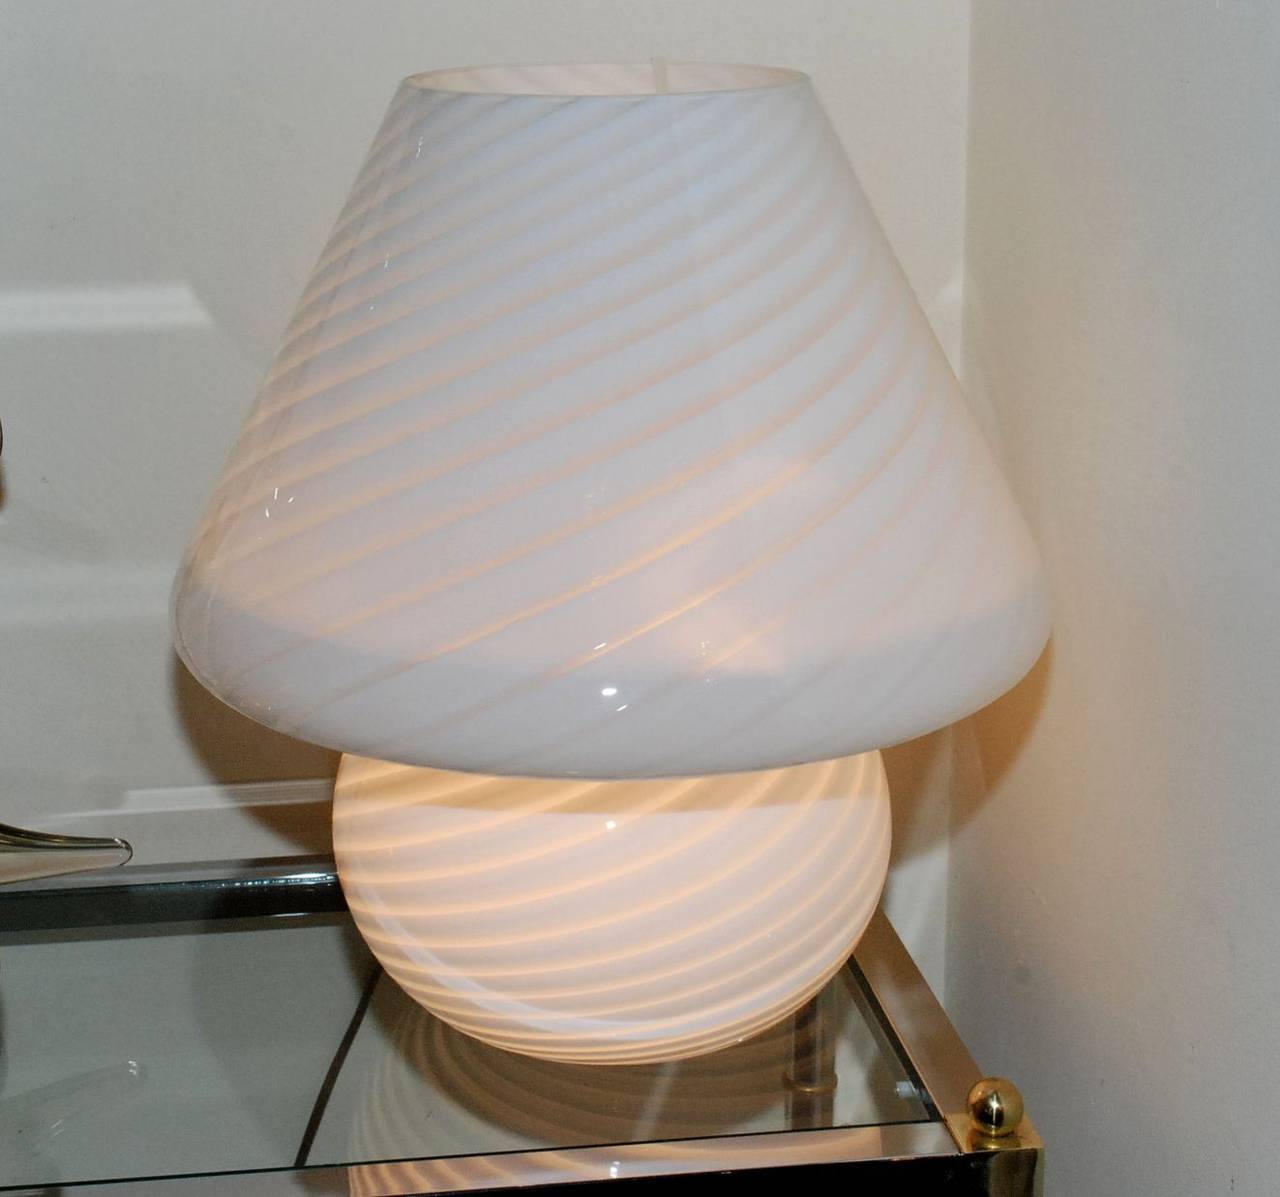 A vintage Vistosi mushroom lamp. It is made of white frost glass with a swirl design all throughout.